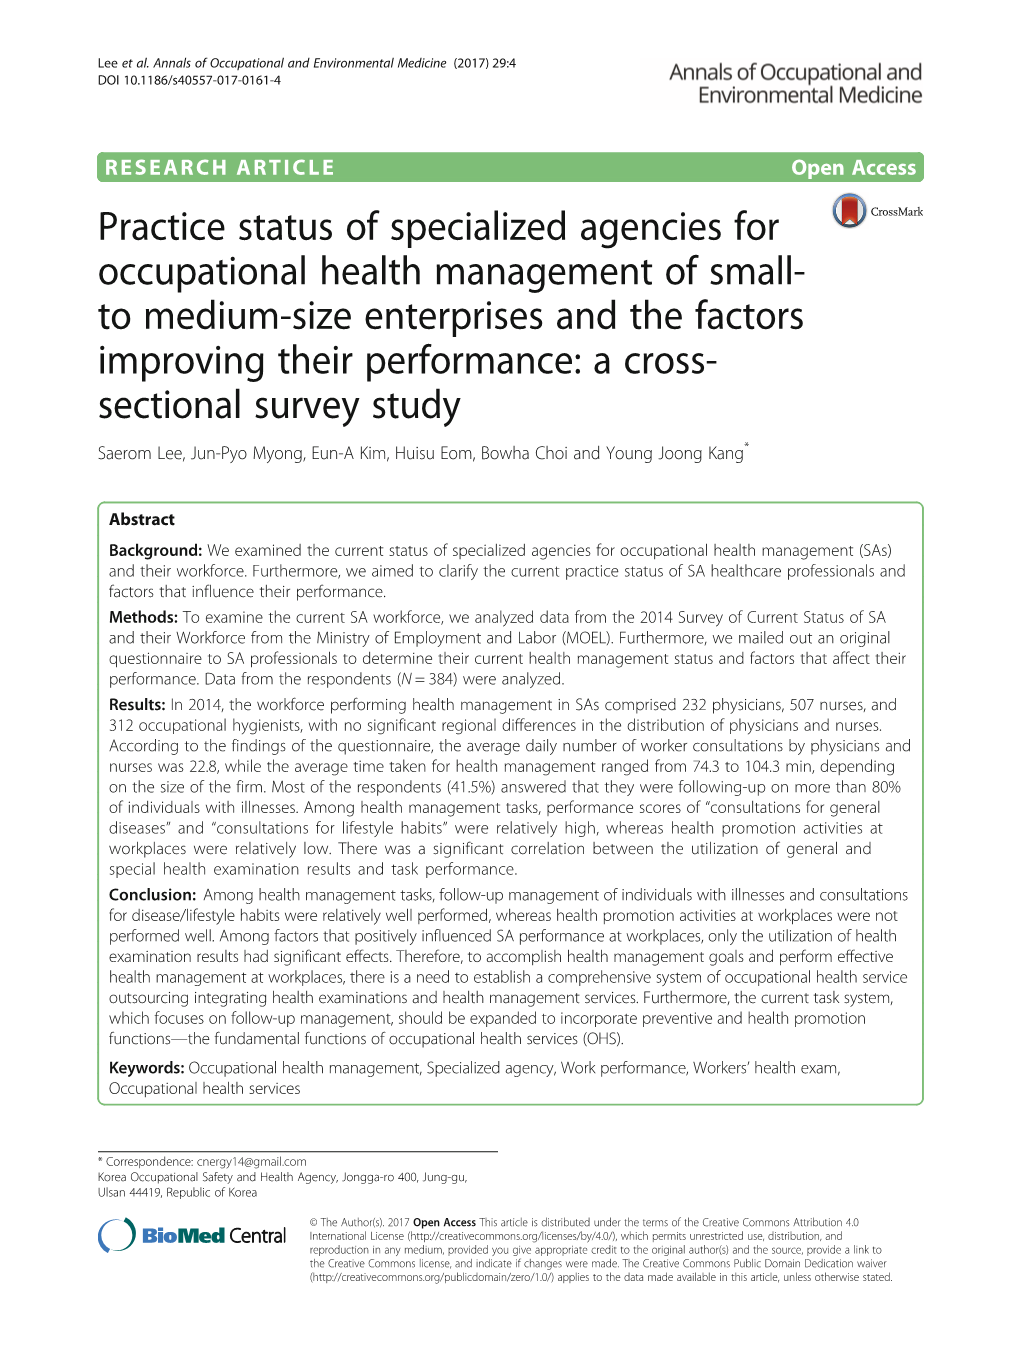 Practice Status of Specialized Agencies for Occupational Health Management of Small